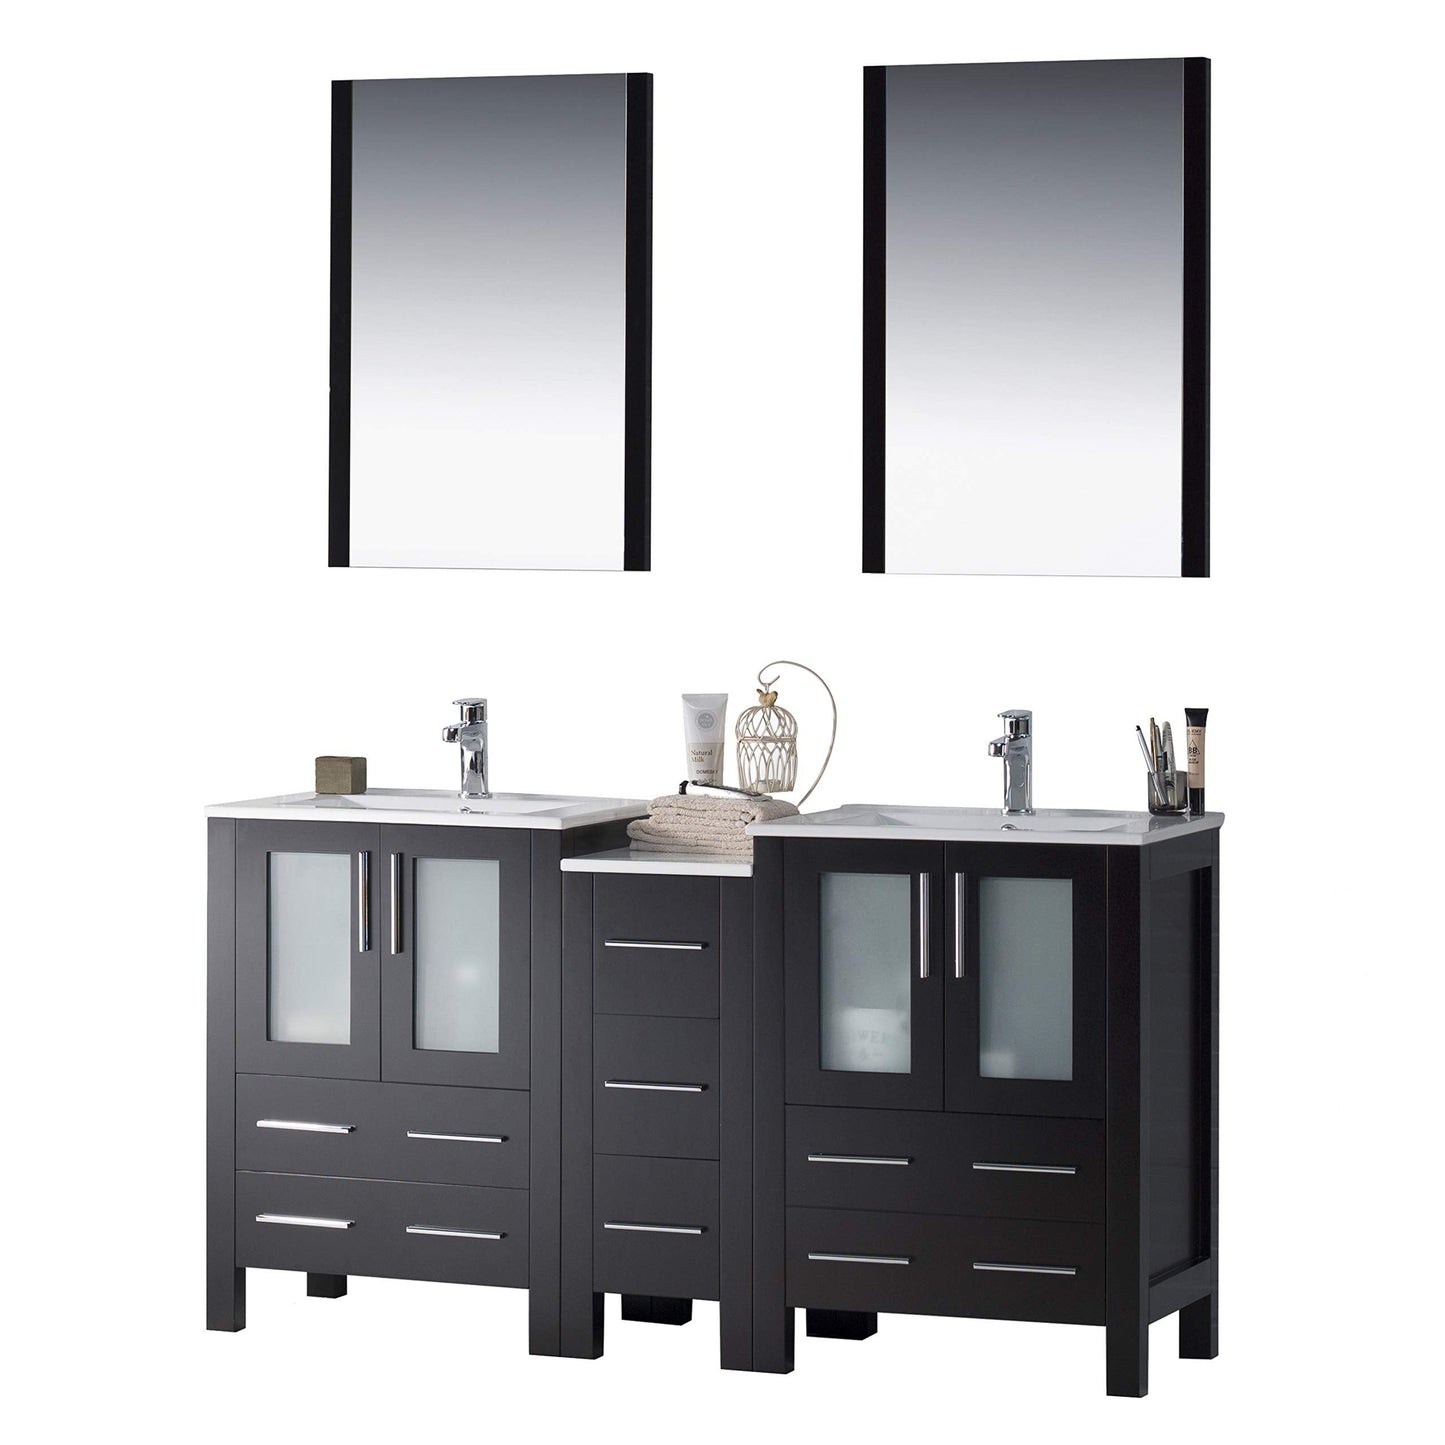 Blossom Sydney 60" Espresso Freestanding Vanity Set With Integrated Double Sink Ceramic Top, Mirror and Side Cabinet